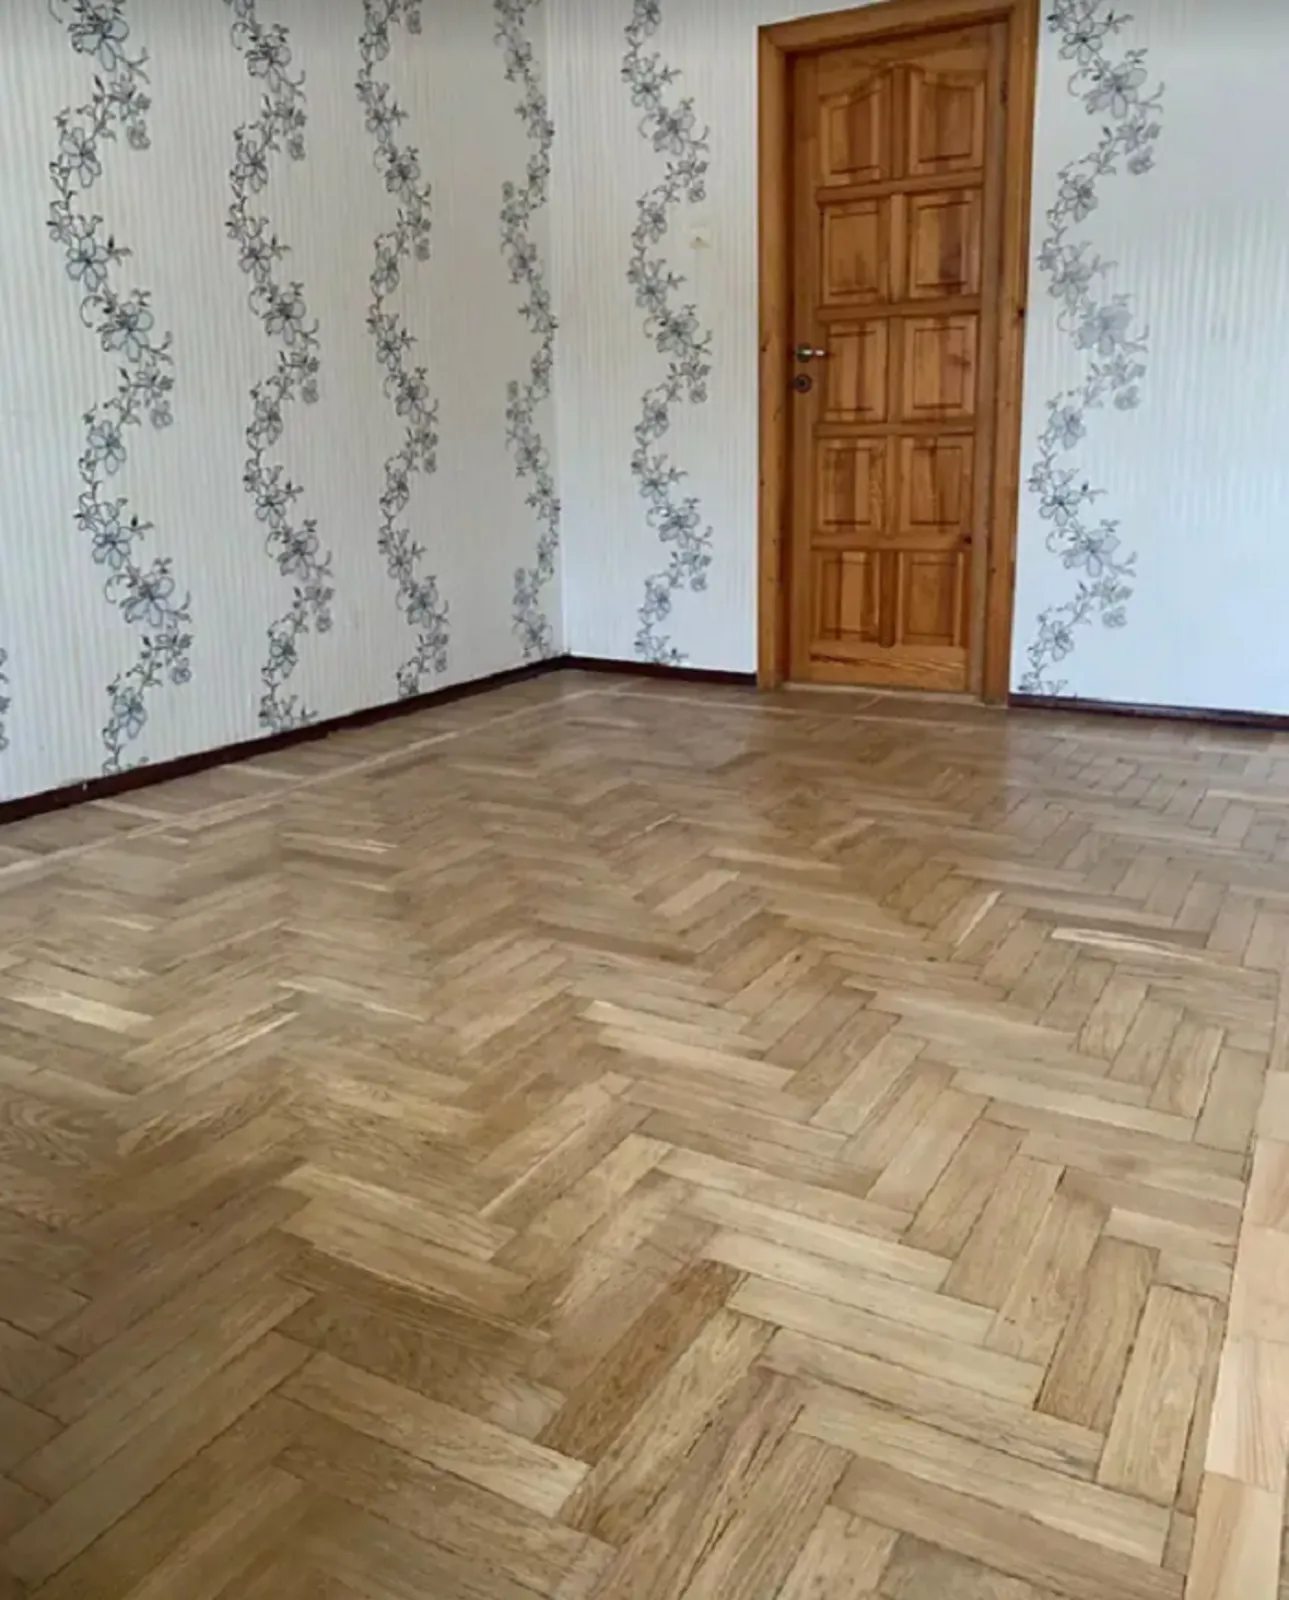 Apartments for sale. 3 rooms, 76 m², 1st floor/5 floors. Staryy park, Ternopil. 